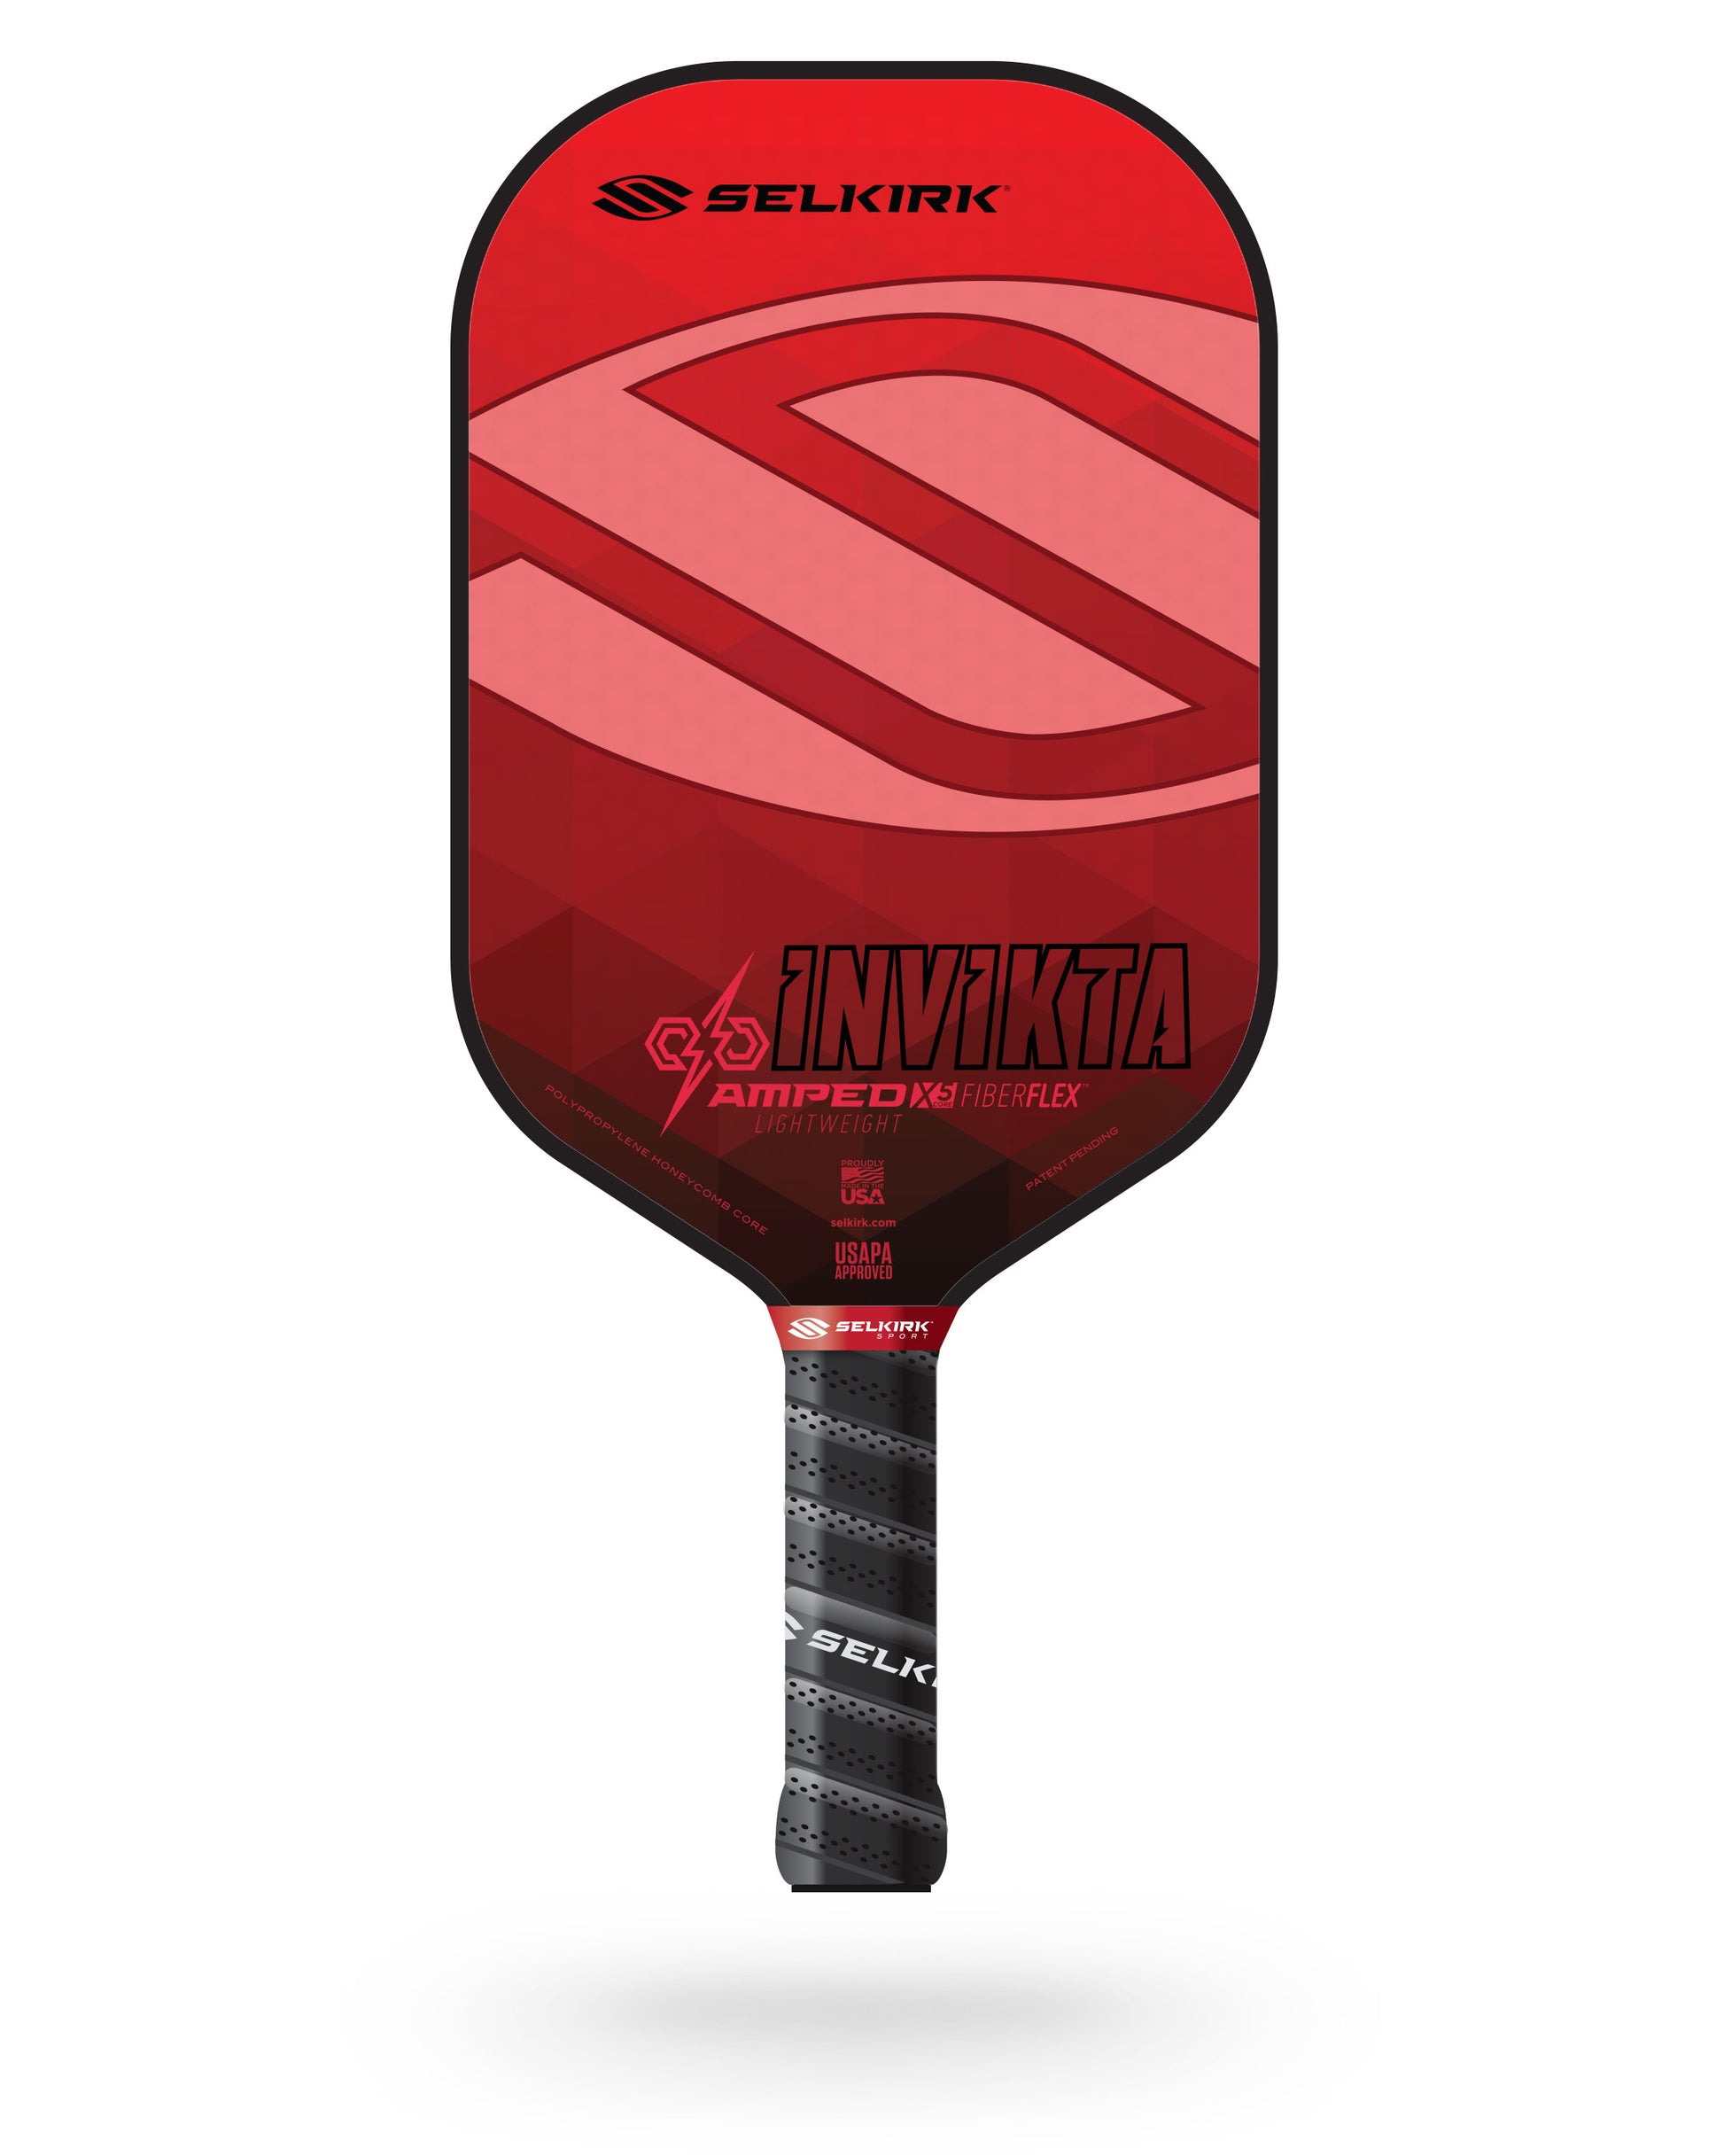 Selkirk Amped Invikta Pickleball Paddle in red and pink